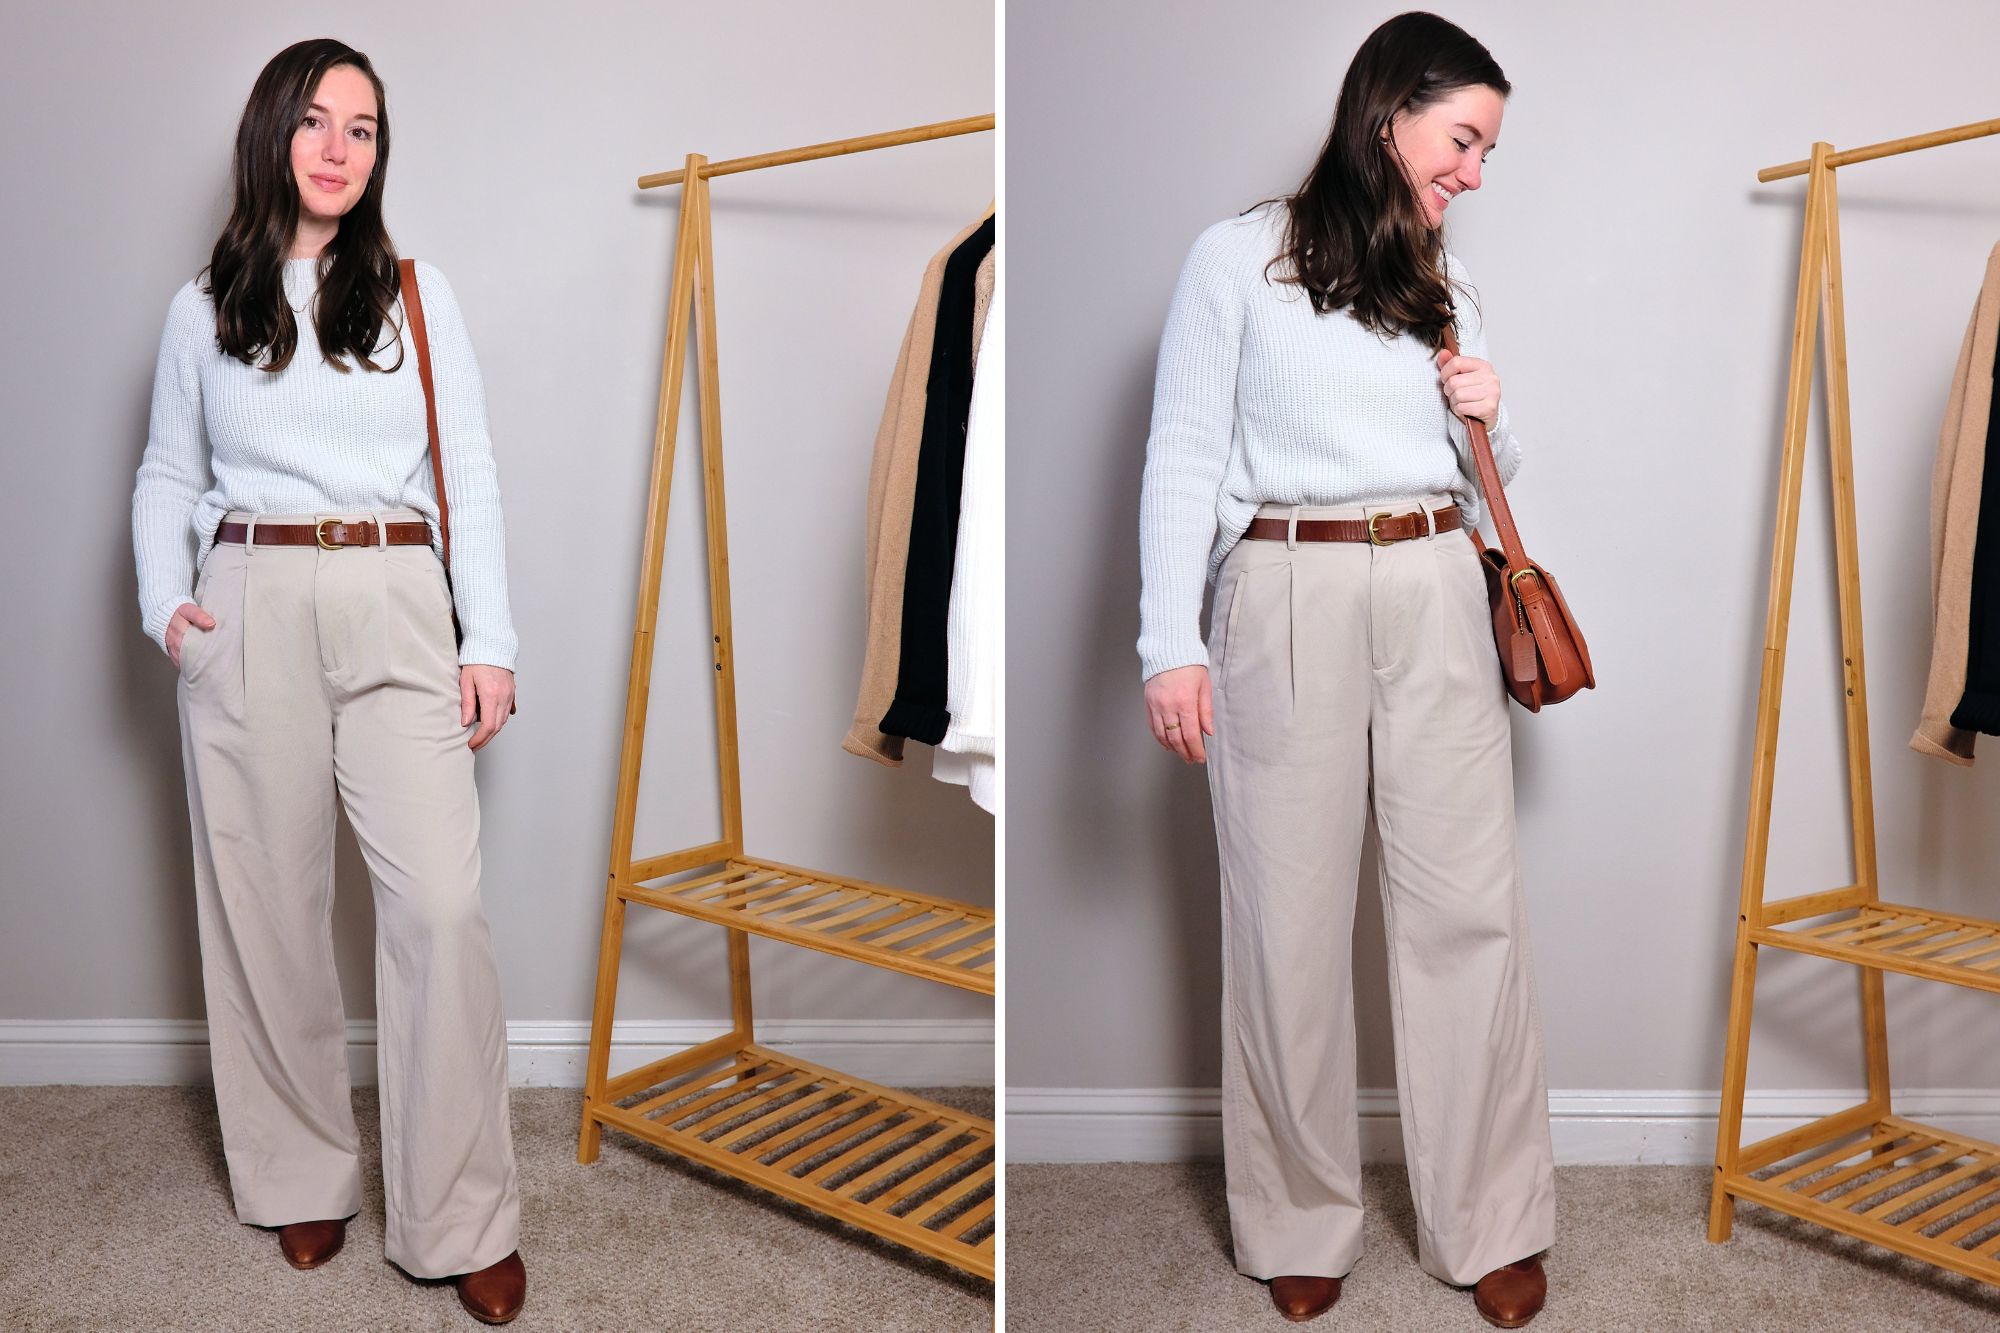 Alyssa wears the cotton Fisherman Sweater from Quince with tan trousers and brown accessories